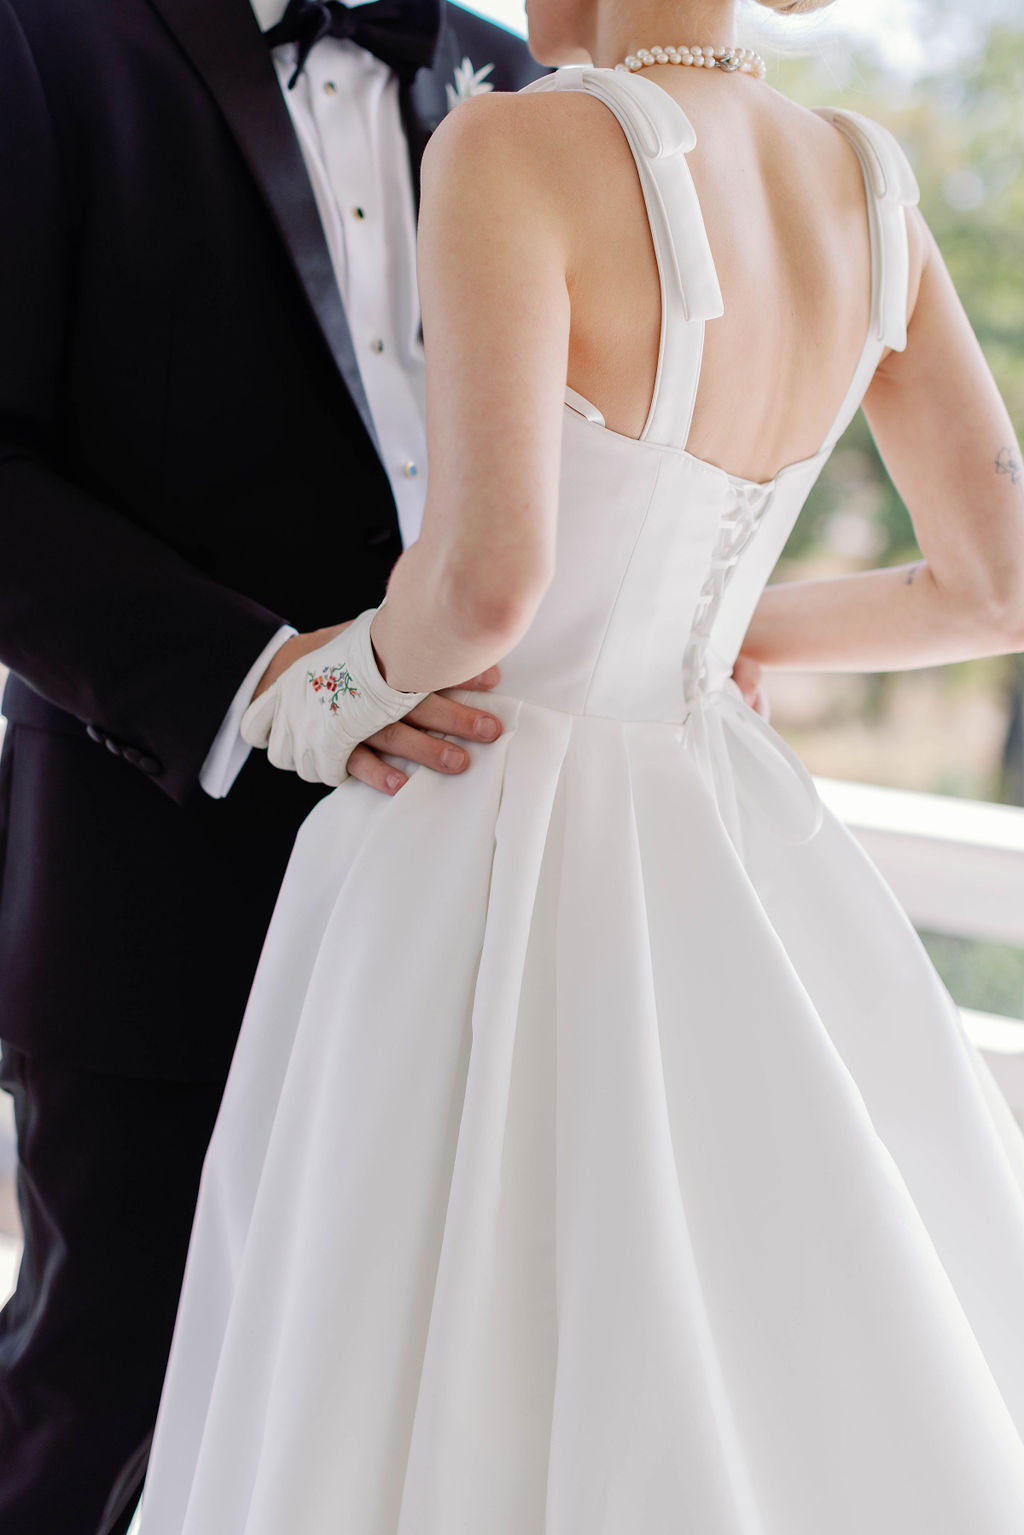 Bride and Groom closeup of their hands together on the brides hips during their first look on the sprawling porch of the Grand Lady Wedding Venue in Austin Texas | Photo by Sarah Block of Sarah Block Photography